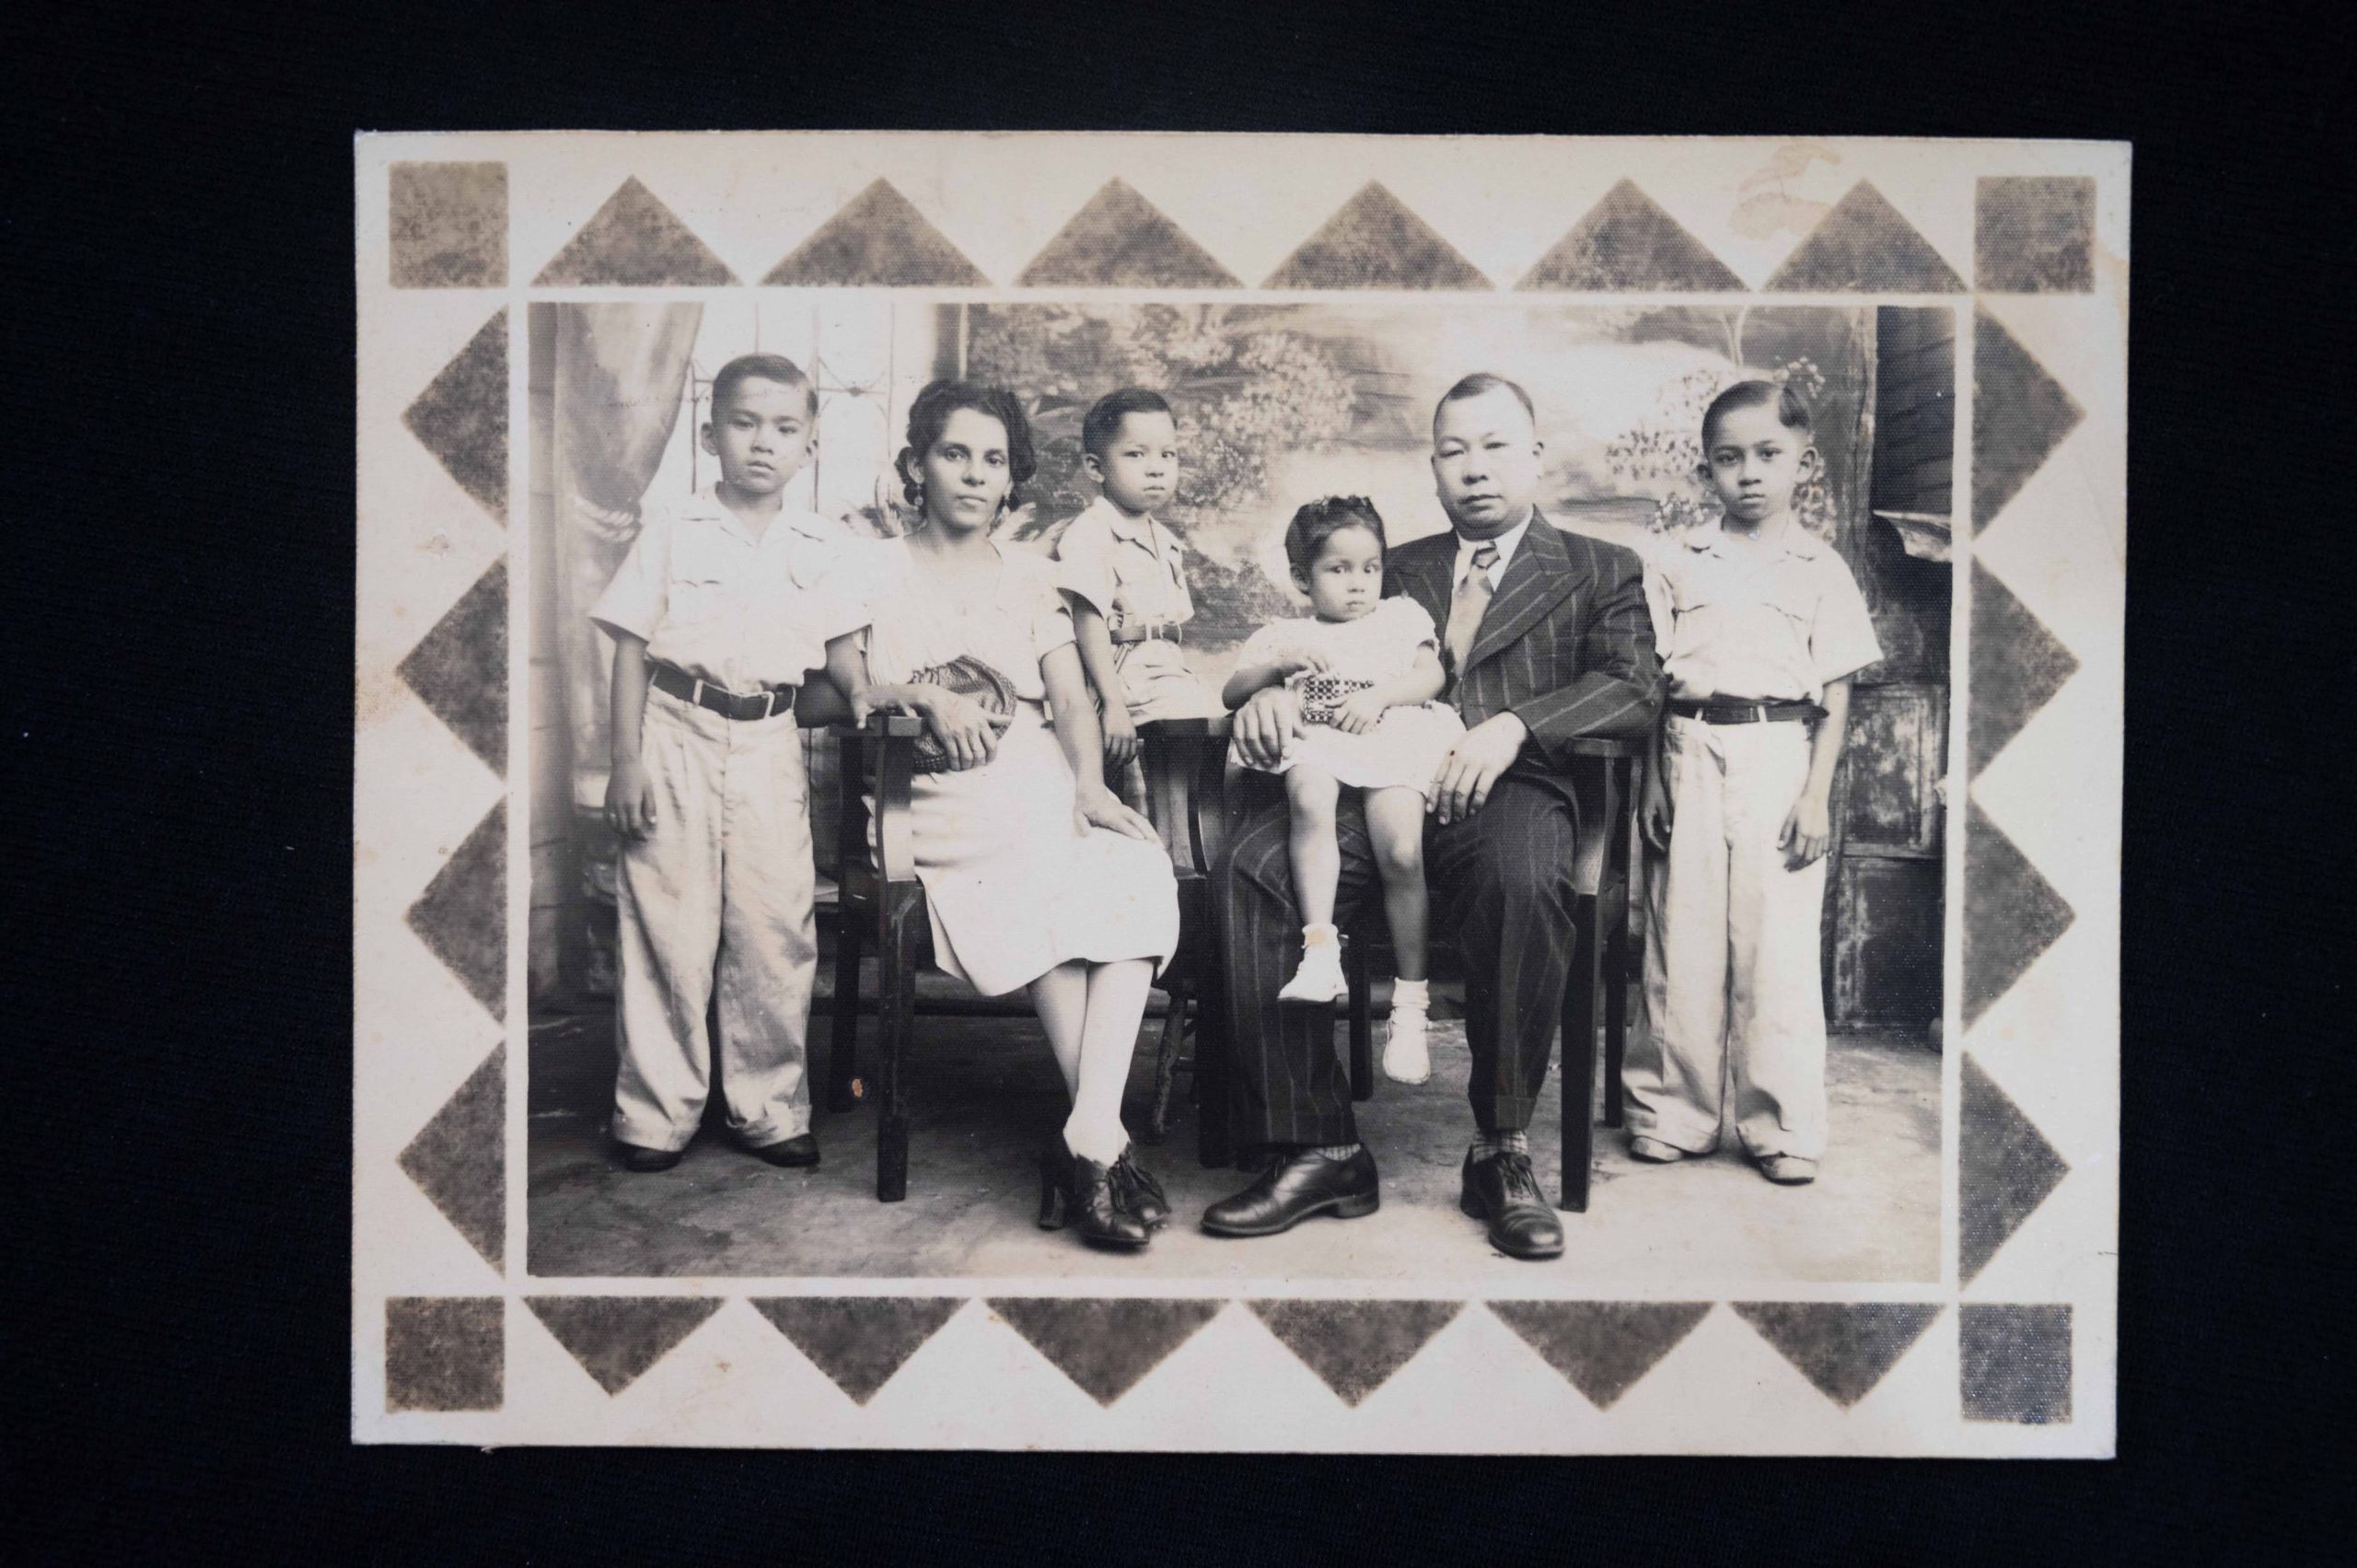 The Wong Soto family c. 1940s, collection of Yolanda Wong Soto, 2019